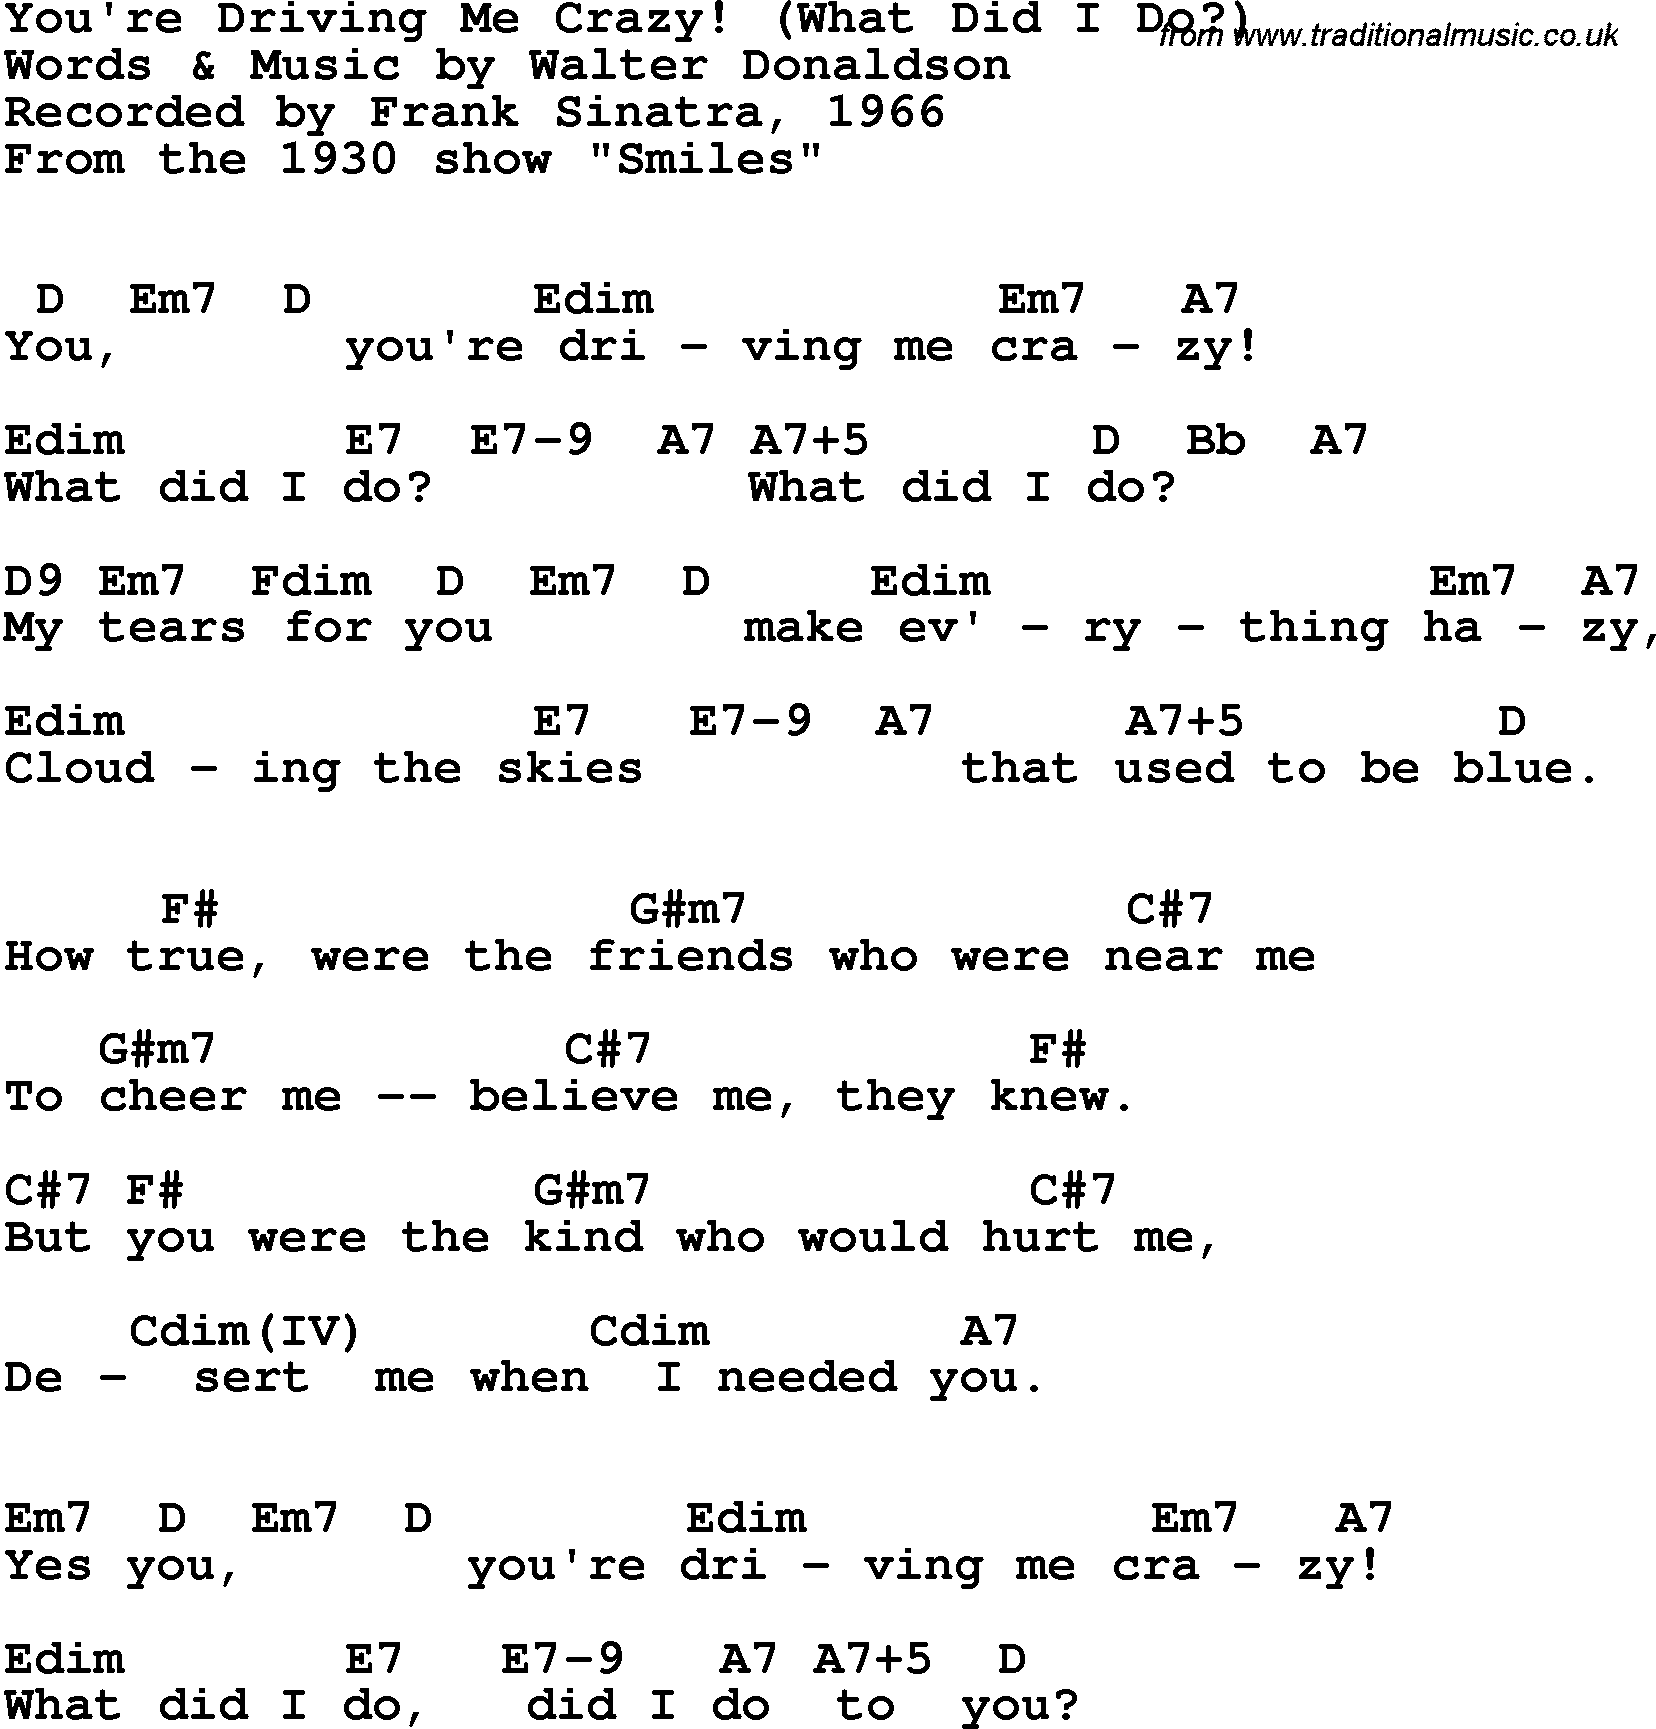 Song Lyrics with guitar chords for You're Driving Me Crazy - Frank Sinatra, 1966